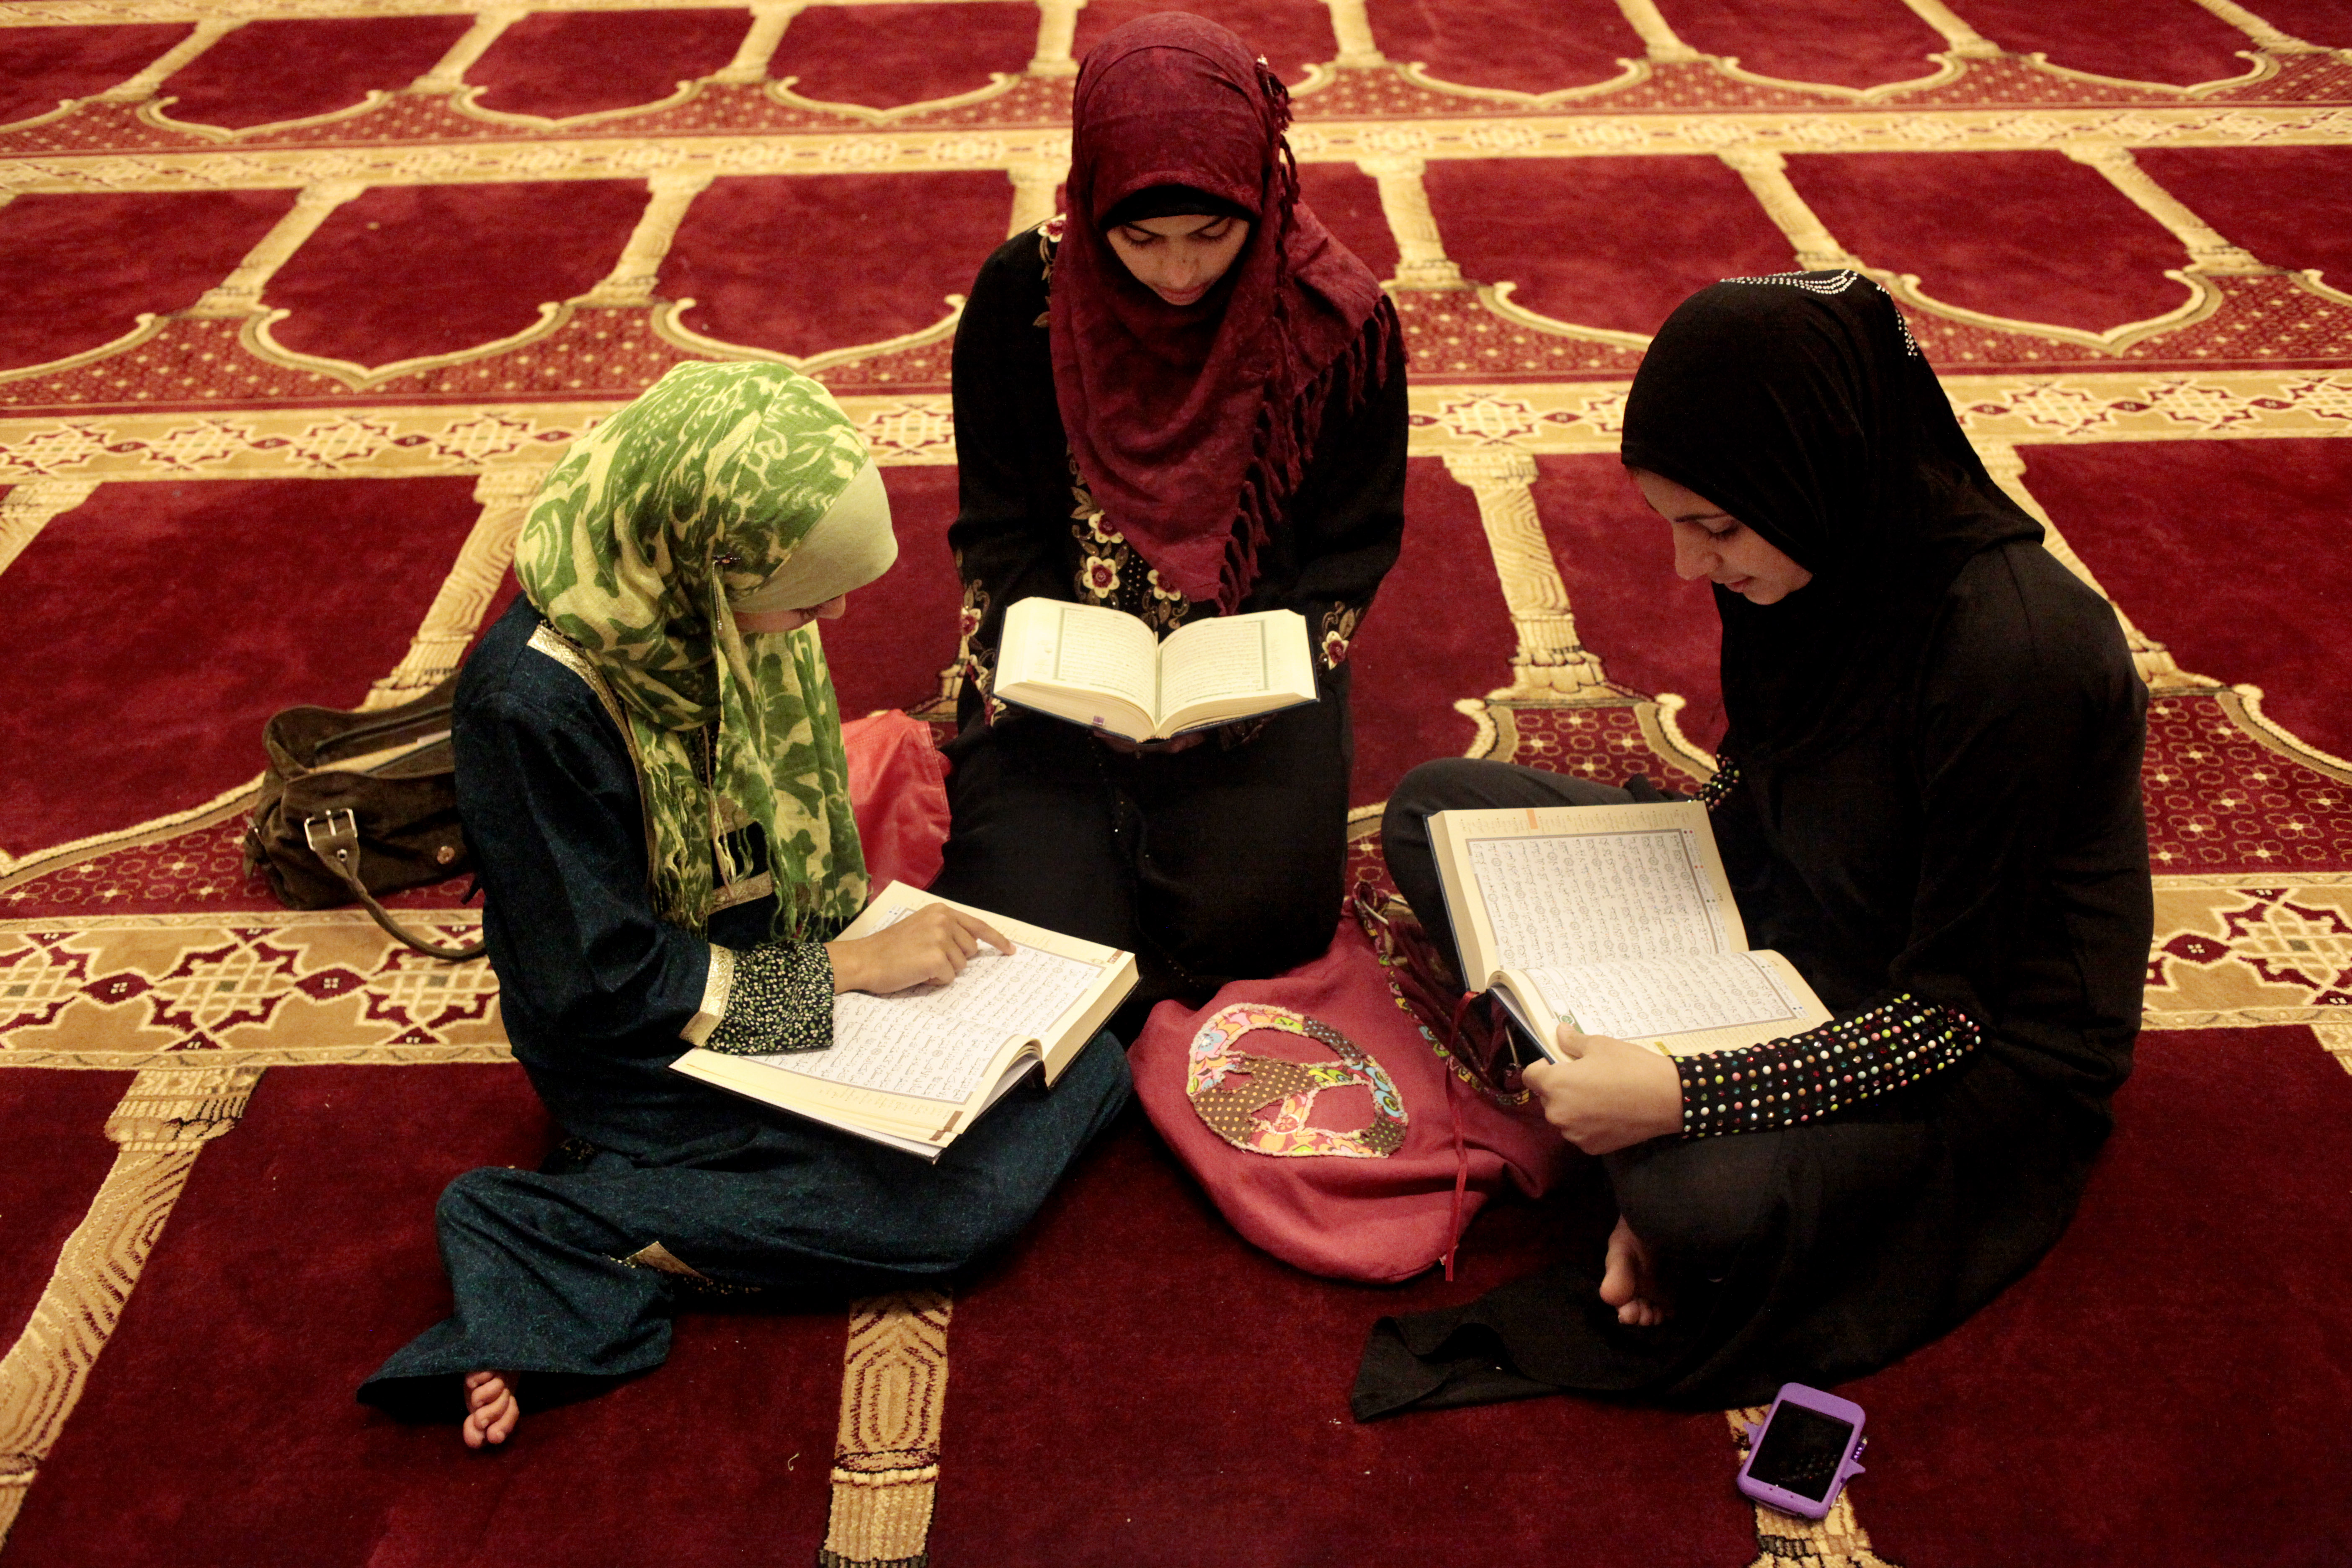 The Status of Women in the Prophetic Sunnah